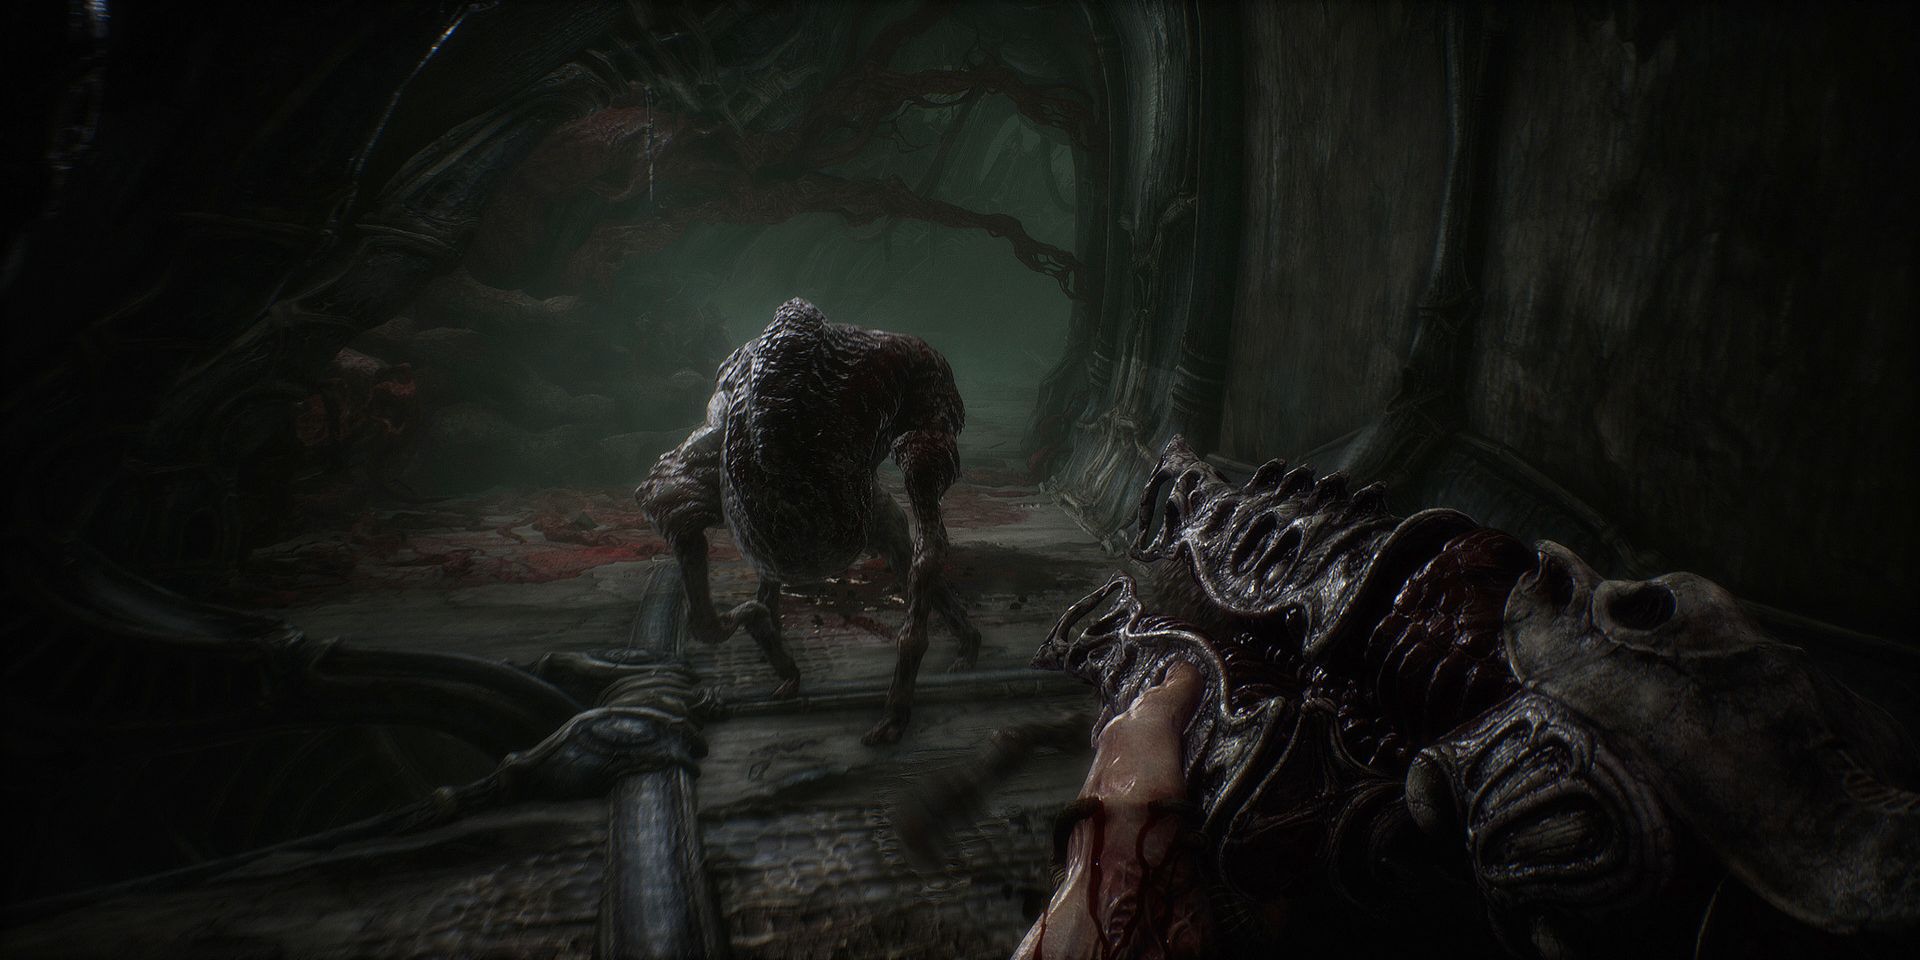 Gameplay from the upcoming horror video game Scorn.